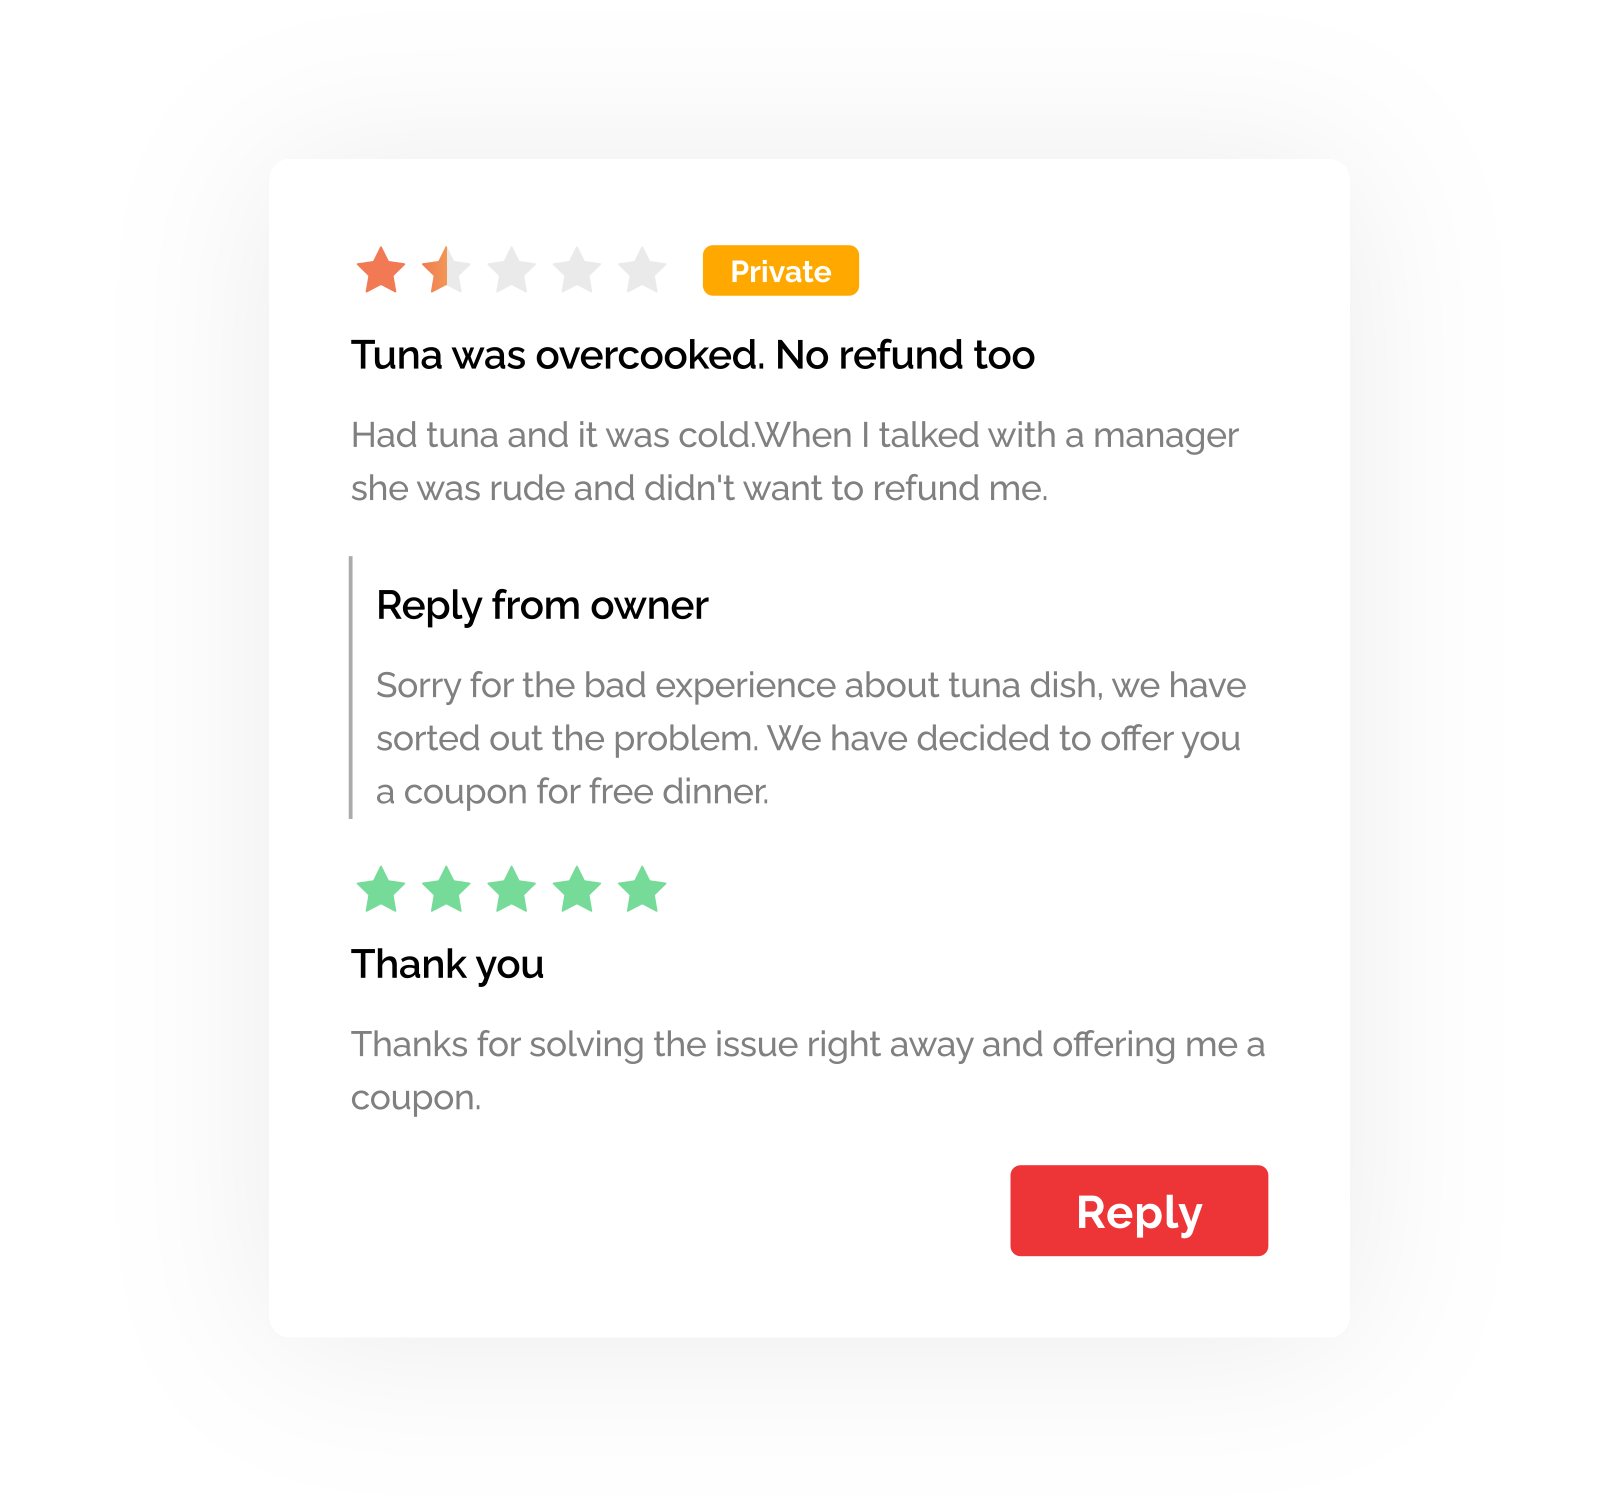 A screenshot of a user interface (UI) element from the product is displayed. The UI design features a chat-like interface, resembling a conversation between a restaurant owner and a customer. The interface provides a private and secure platform for restaurant owners to respond to customers' feedback. It showcases a text input field, along with a list of previous customer messages and restaurant owner responses. This image represents the functionality of privately engaging with customers' feedback to improve food, service, and brand experiences.